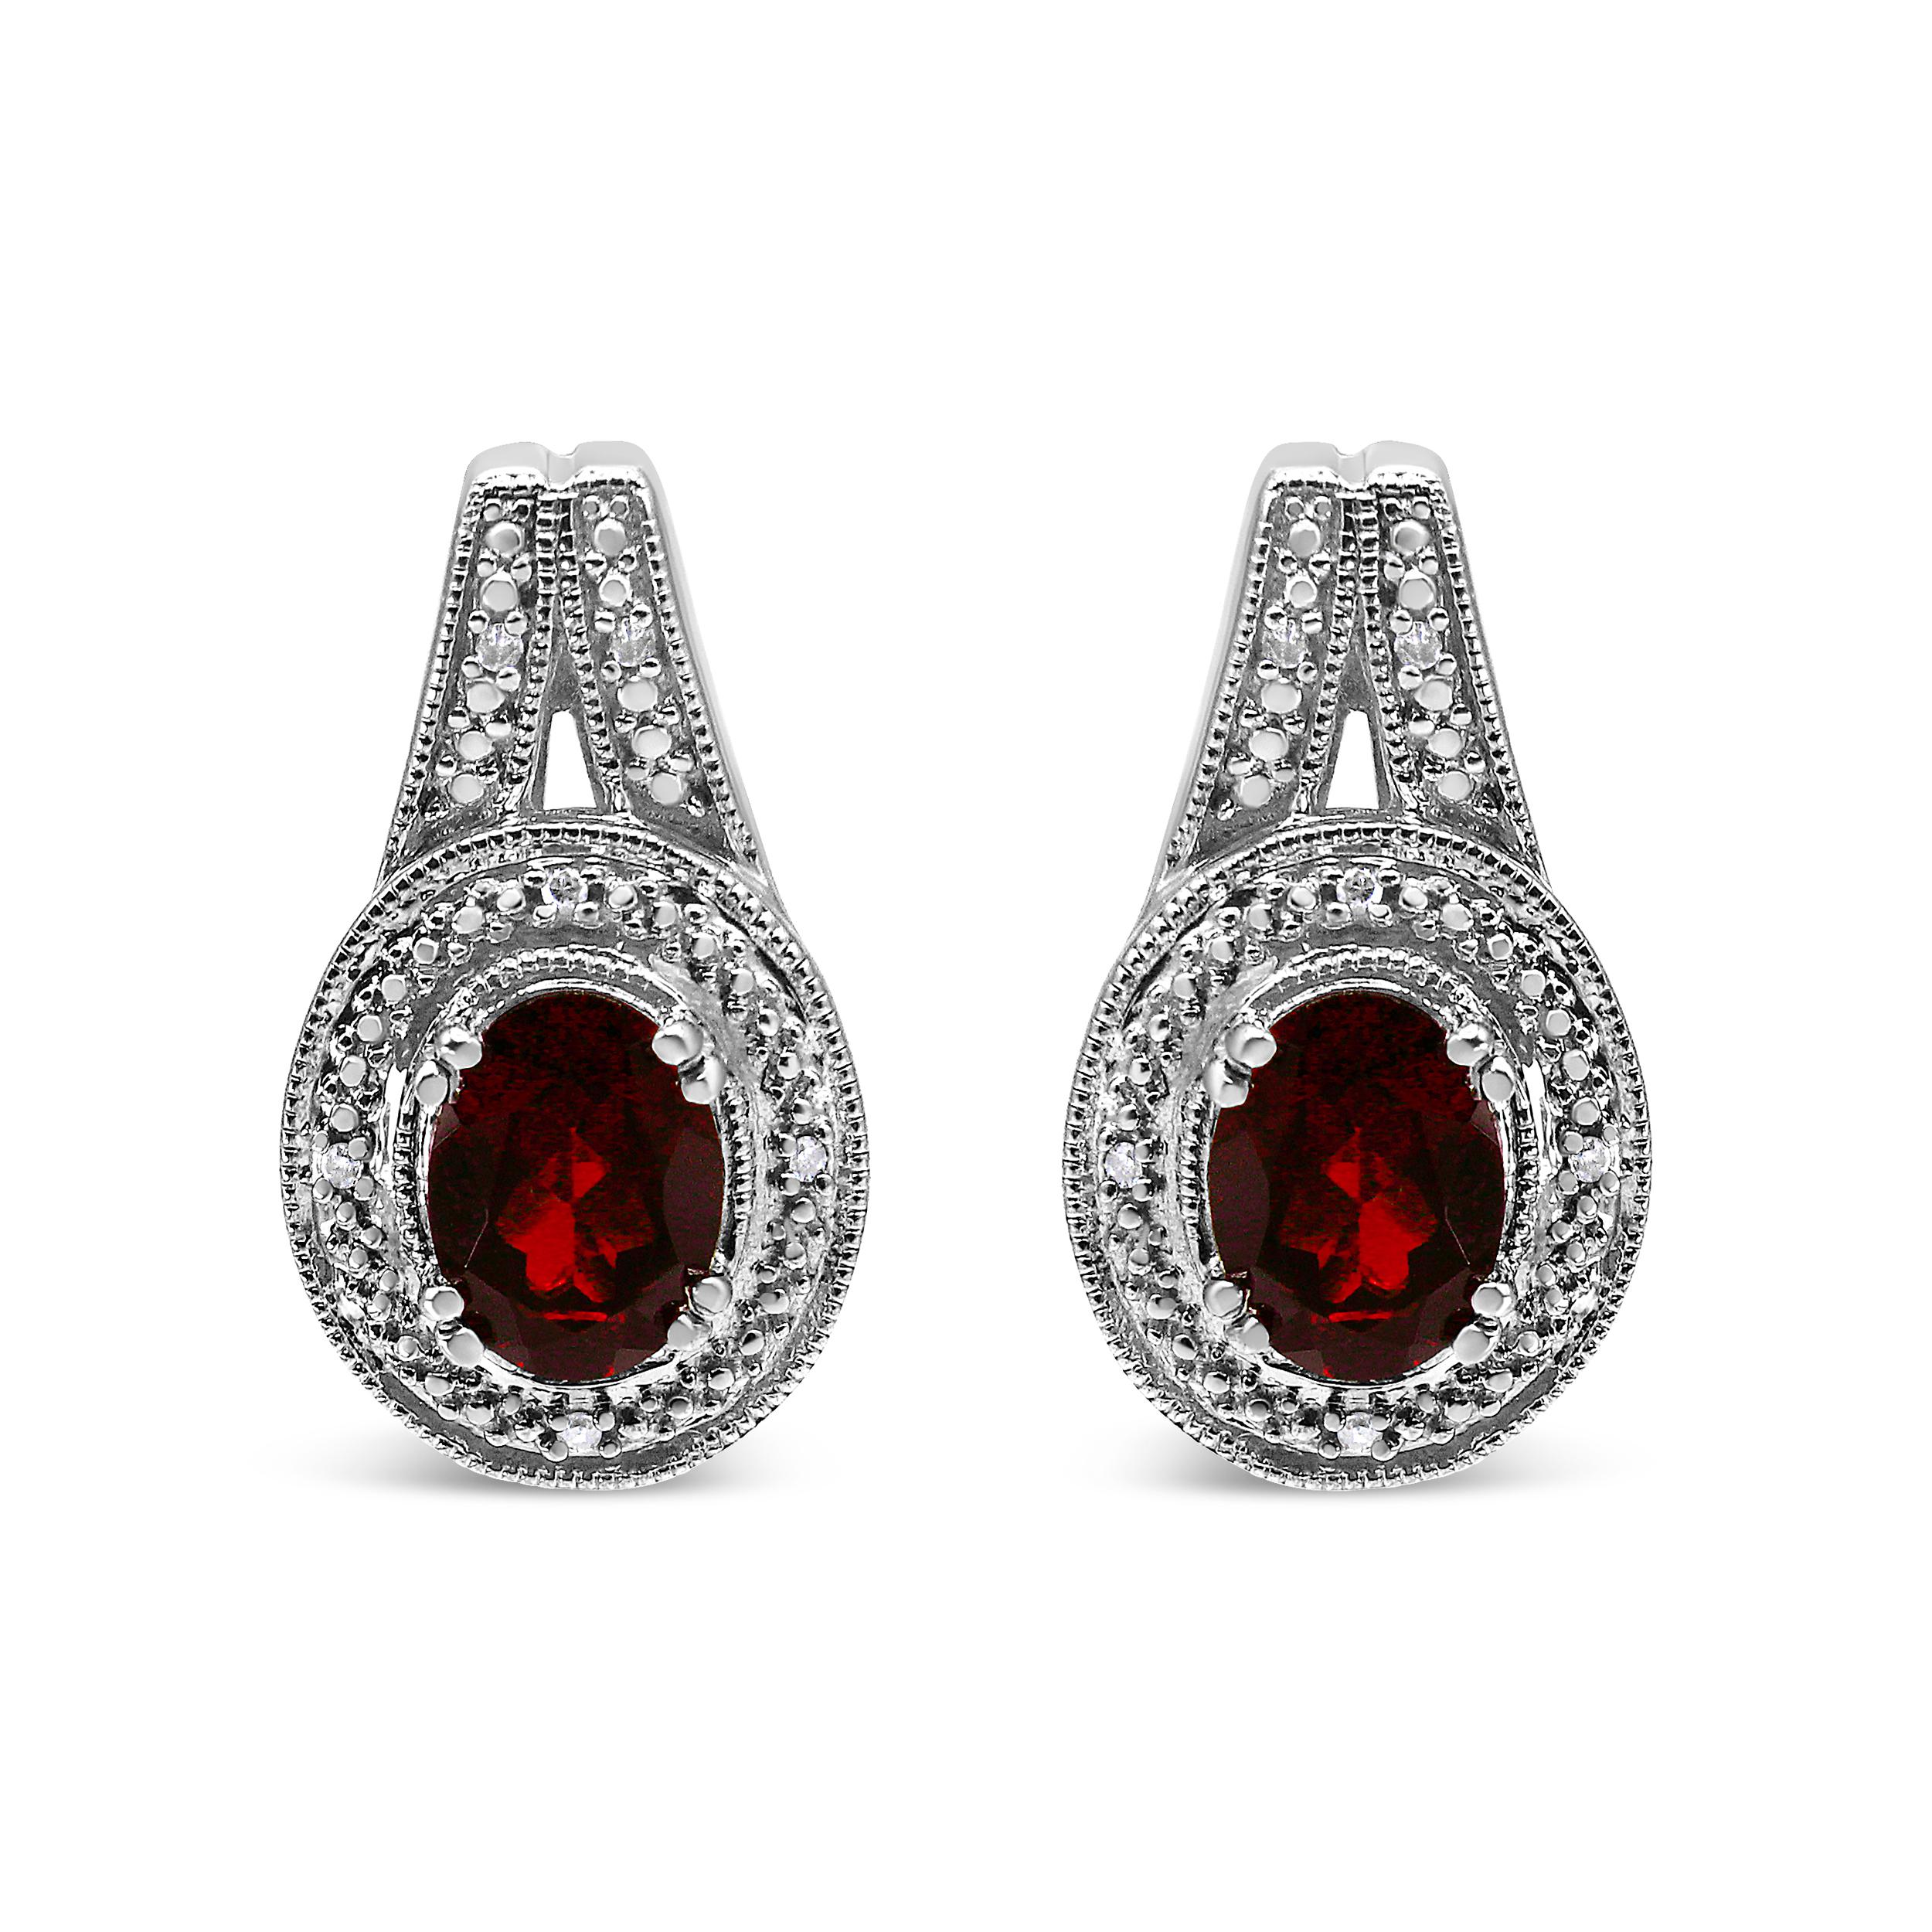 .925 Sterling Silver Diamond Accent and 8x6mm Red Oval Garnet Stud Earrings